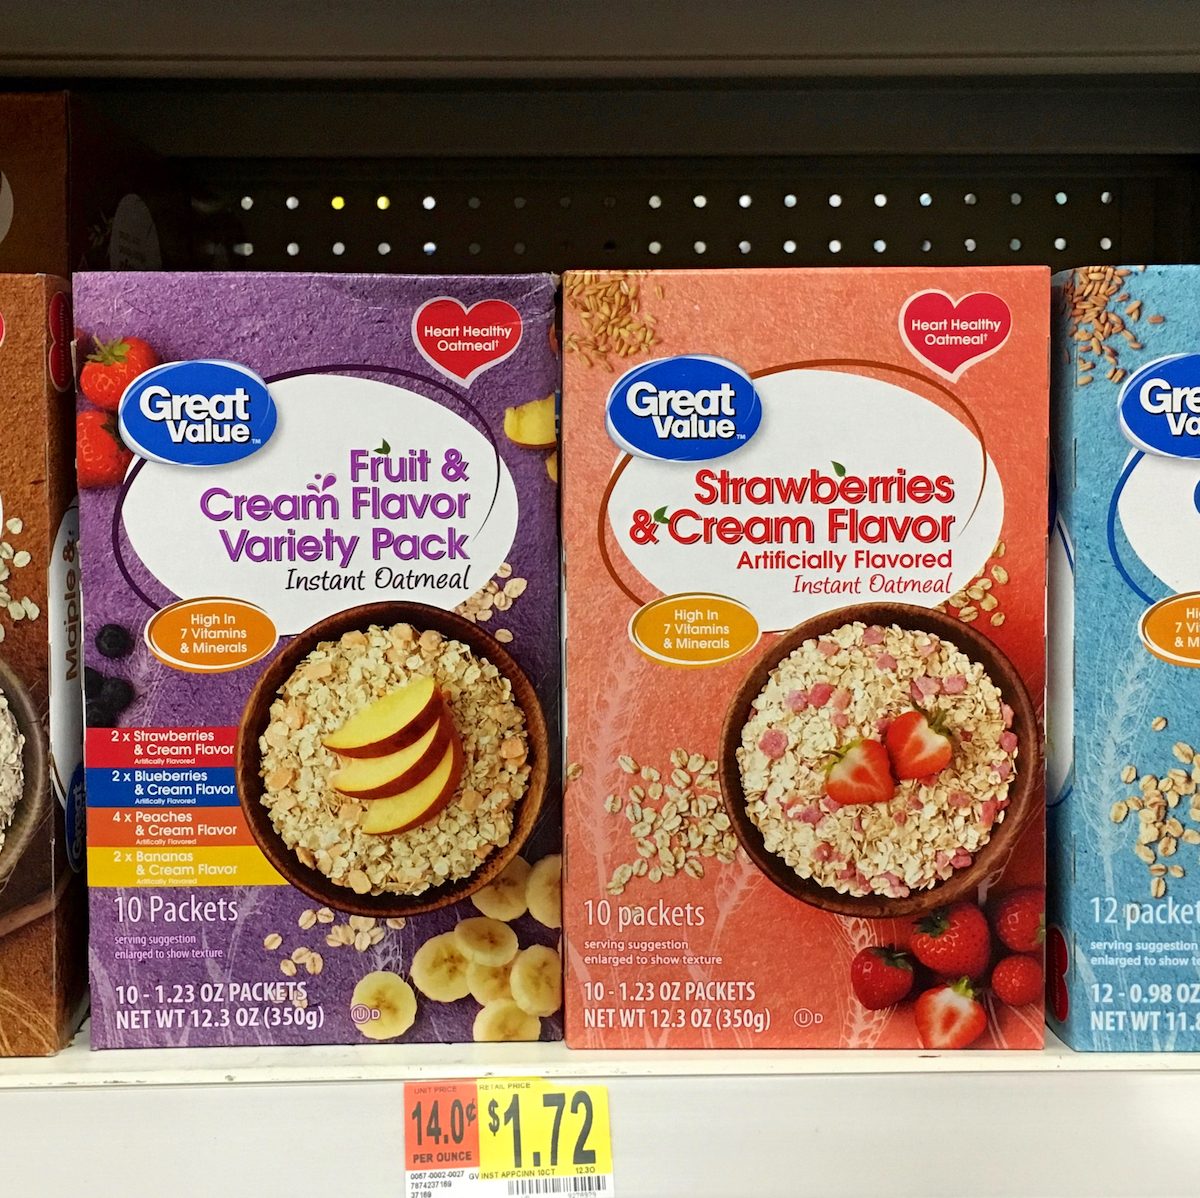 Grocery store shelf with boxes of Great Value generic flavored instant Oatmeal packages. Great Value is a Walmart brand product.